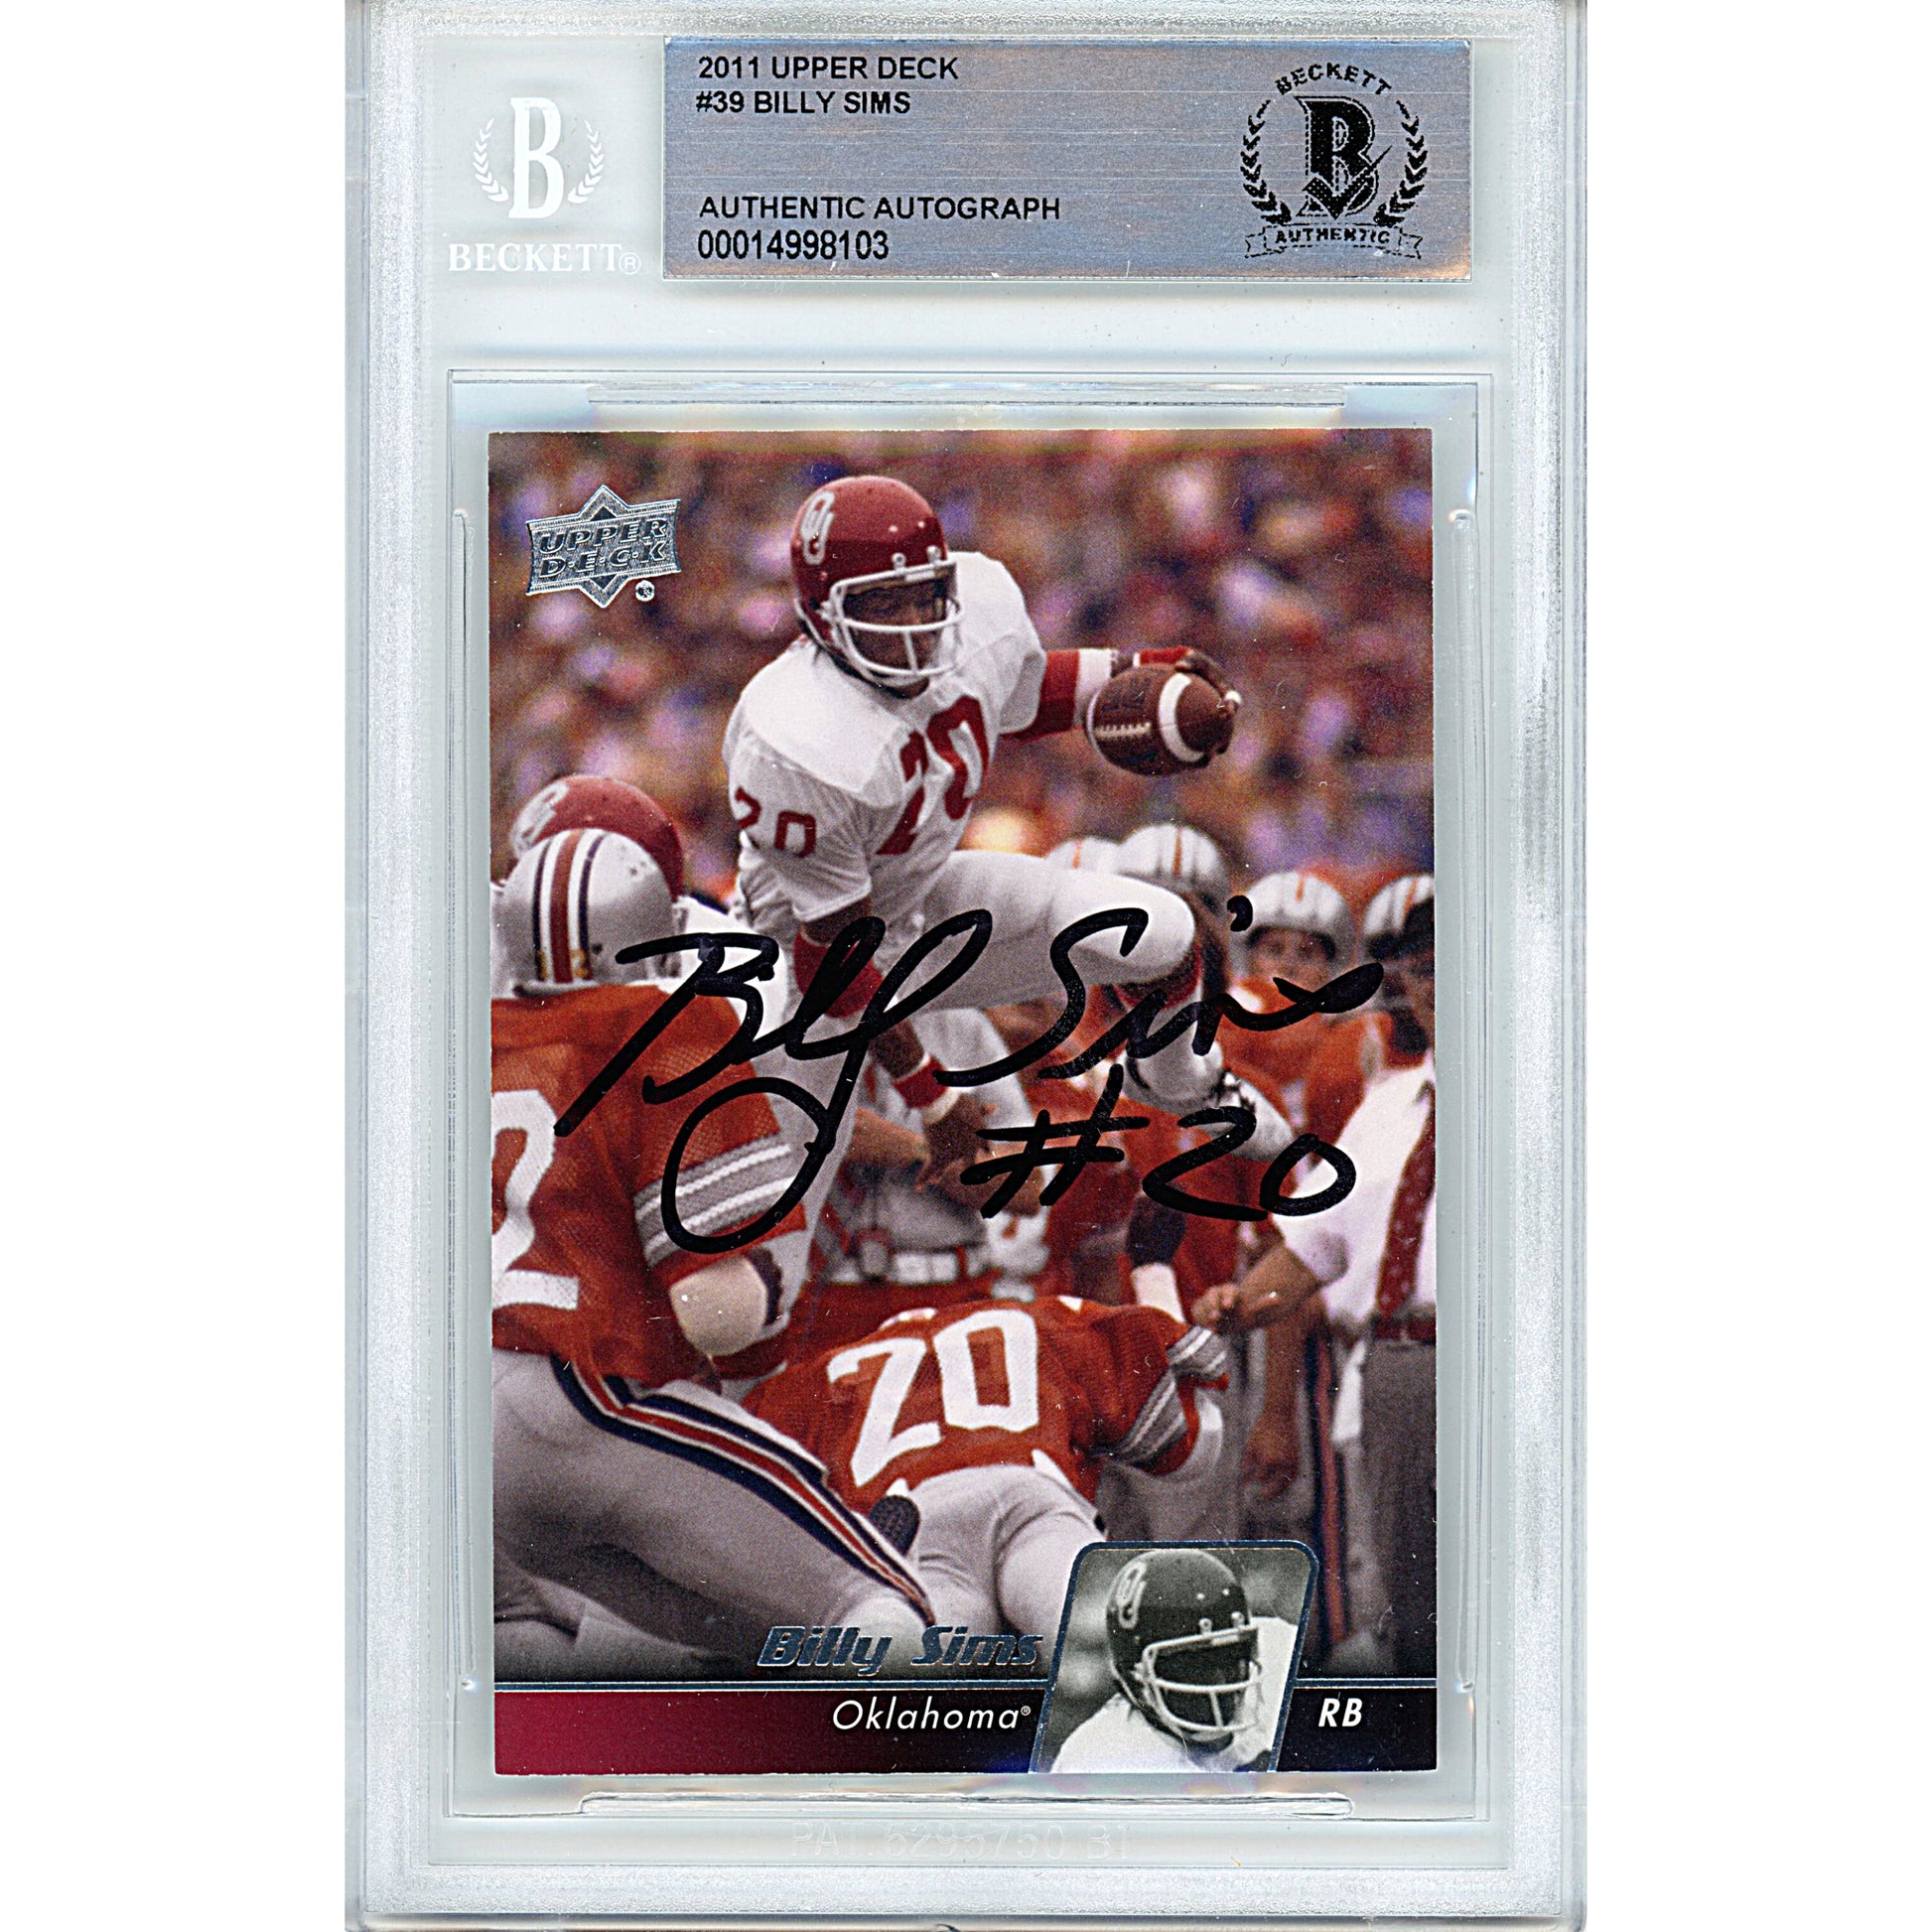 Football- Autographed- Billy Sims Signed 2011 Upper Deck Oklahoma Sooners Football Card Beckett Authentication Slabbed 00014998103 - 101